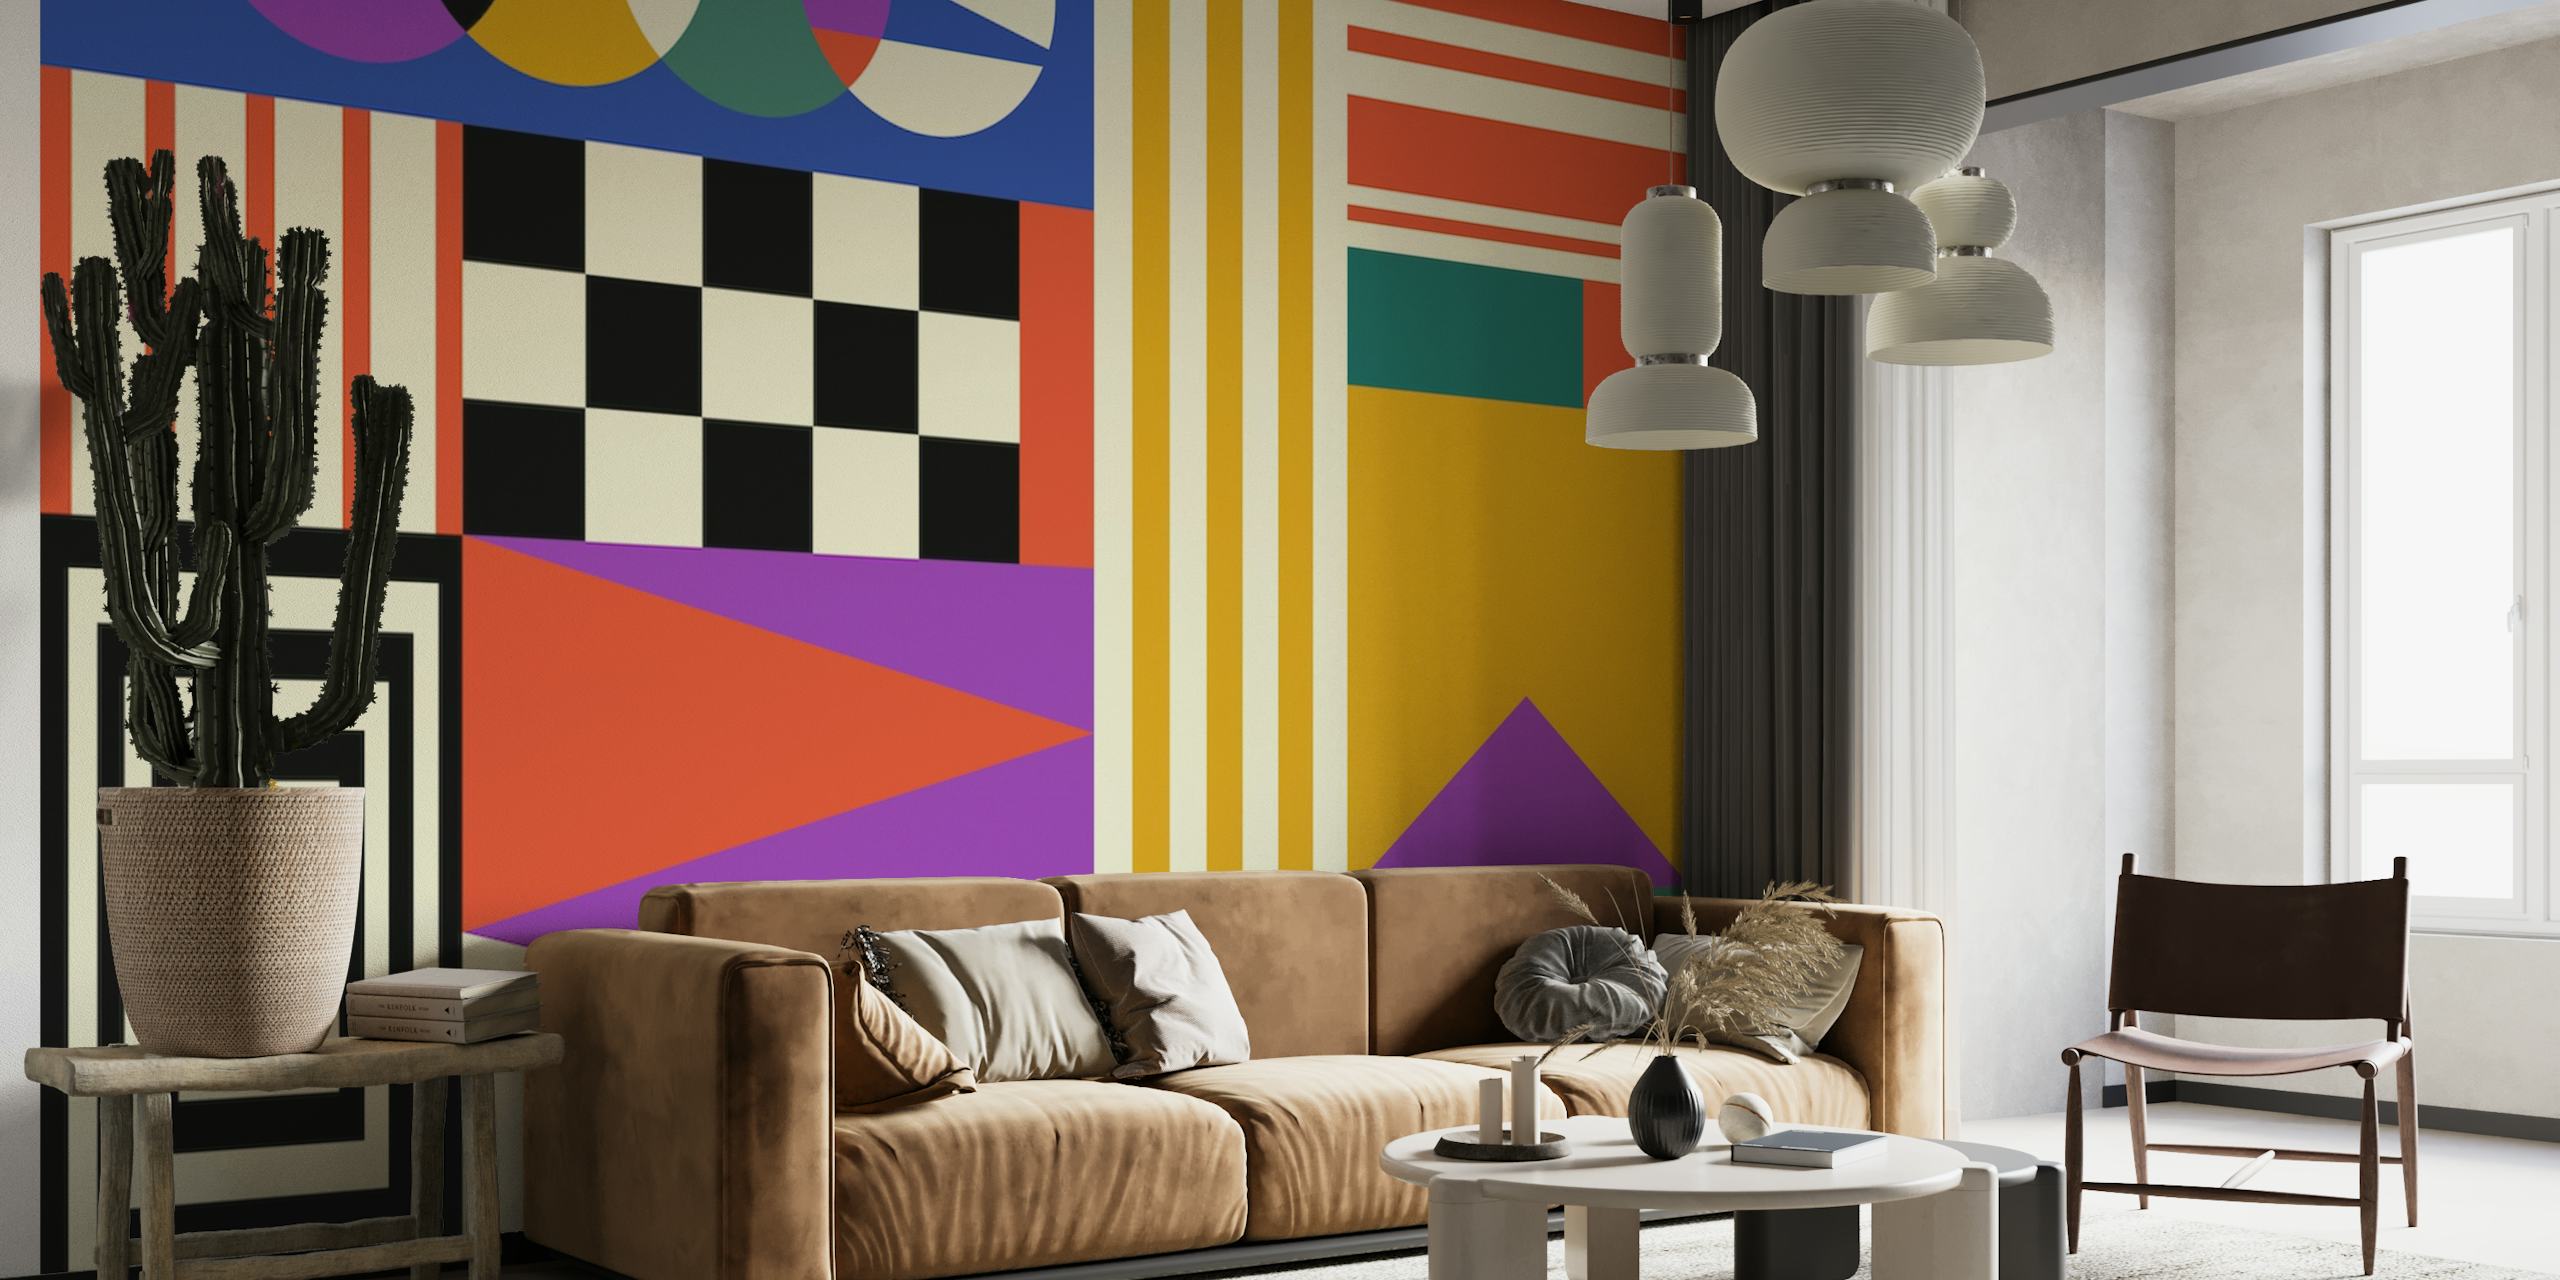 Colorful geometric wall mural with varied shapes and patterns